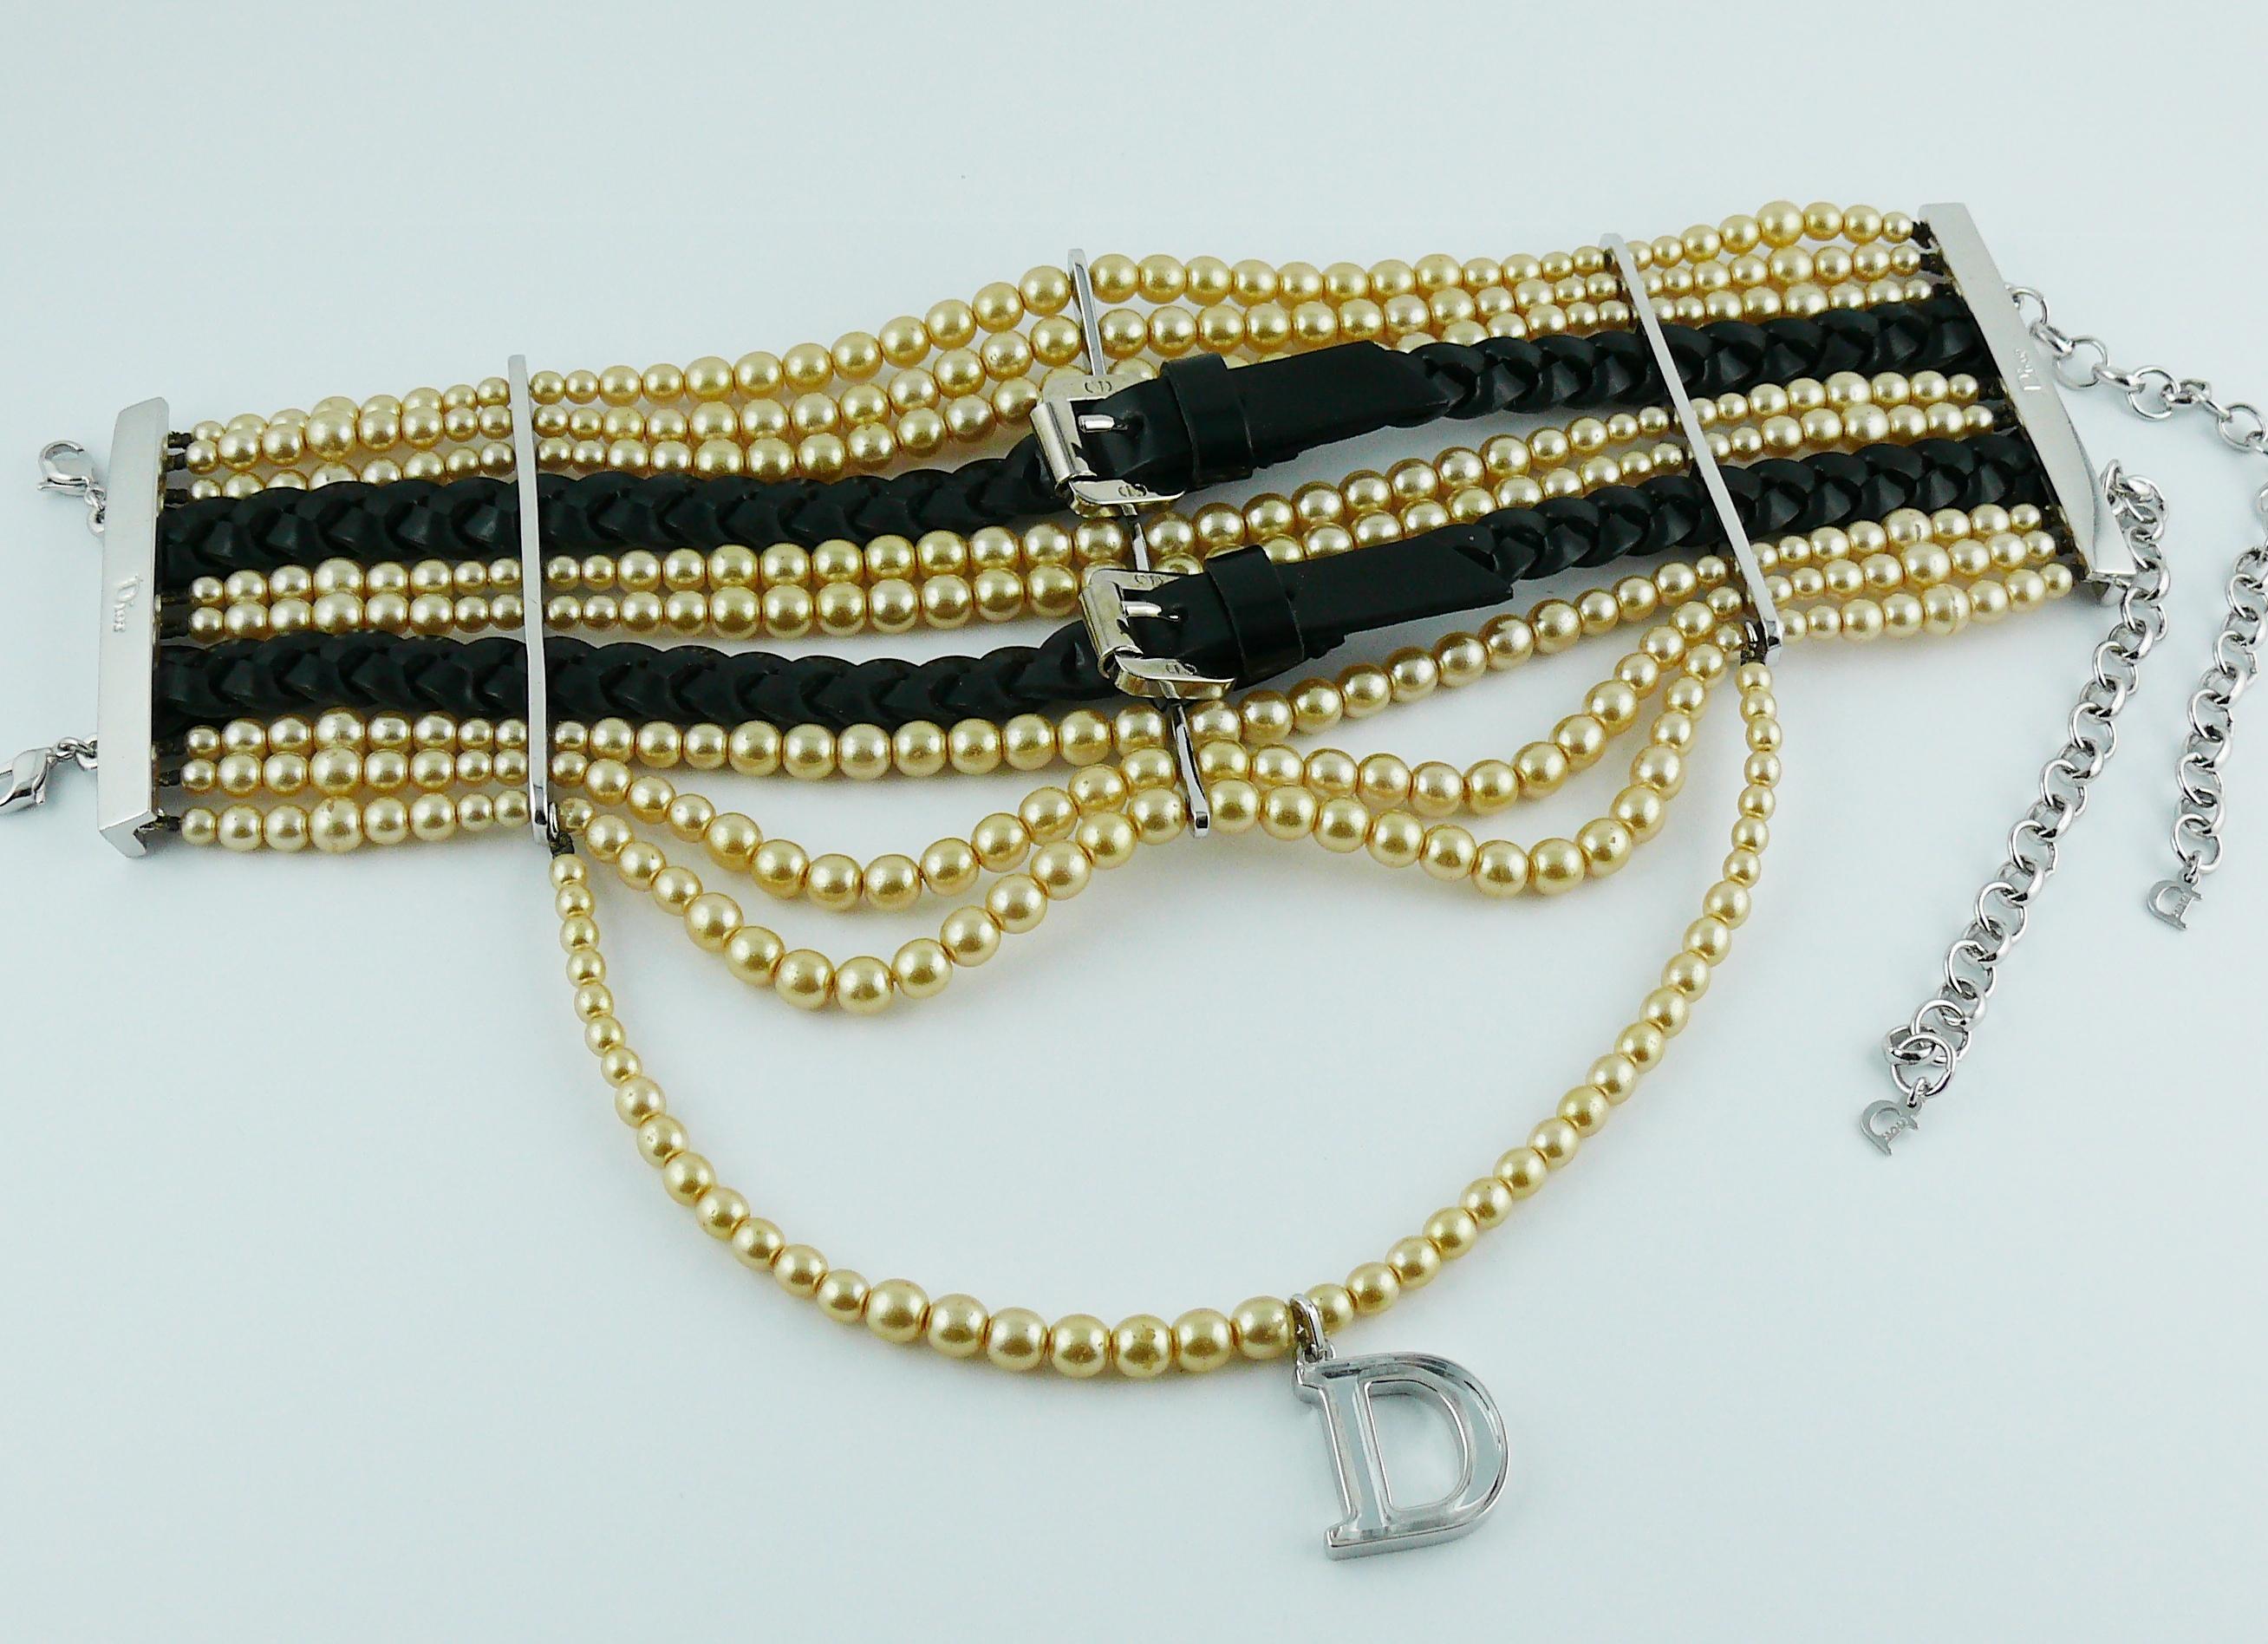 CHRISTIAN DIOR by JOHN GALLIANO Masai style choker necklace.

This necklace features : 
- Nine rows of graduated faux glass pearls.
- Two black braided leather straps with buckle in silver tone.
- Mirrored silver D charm at the centre.
- Double hook